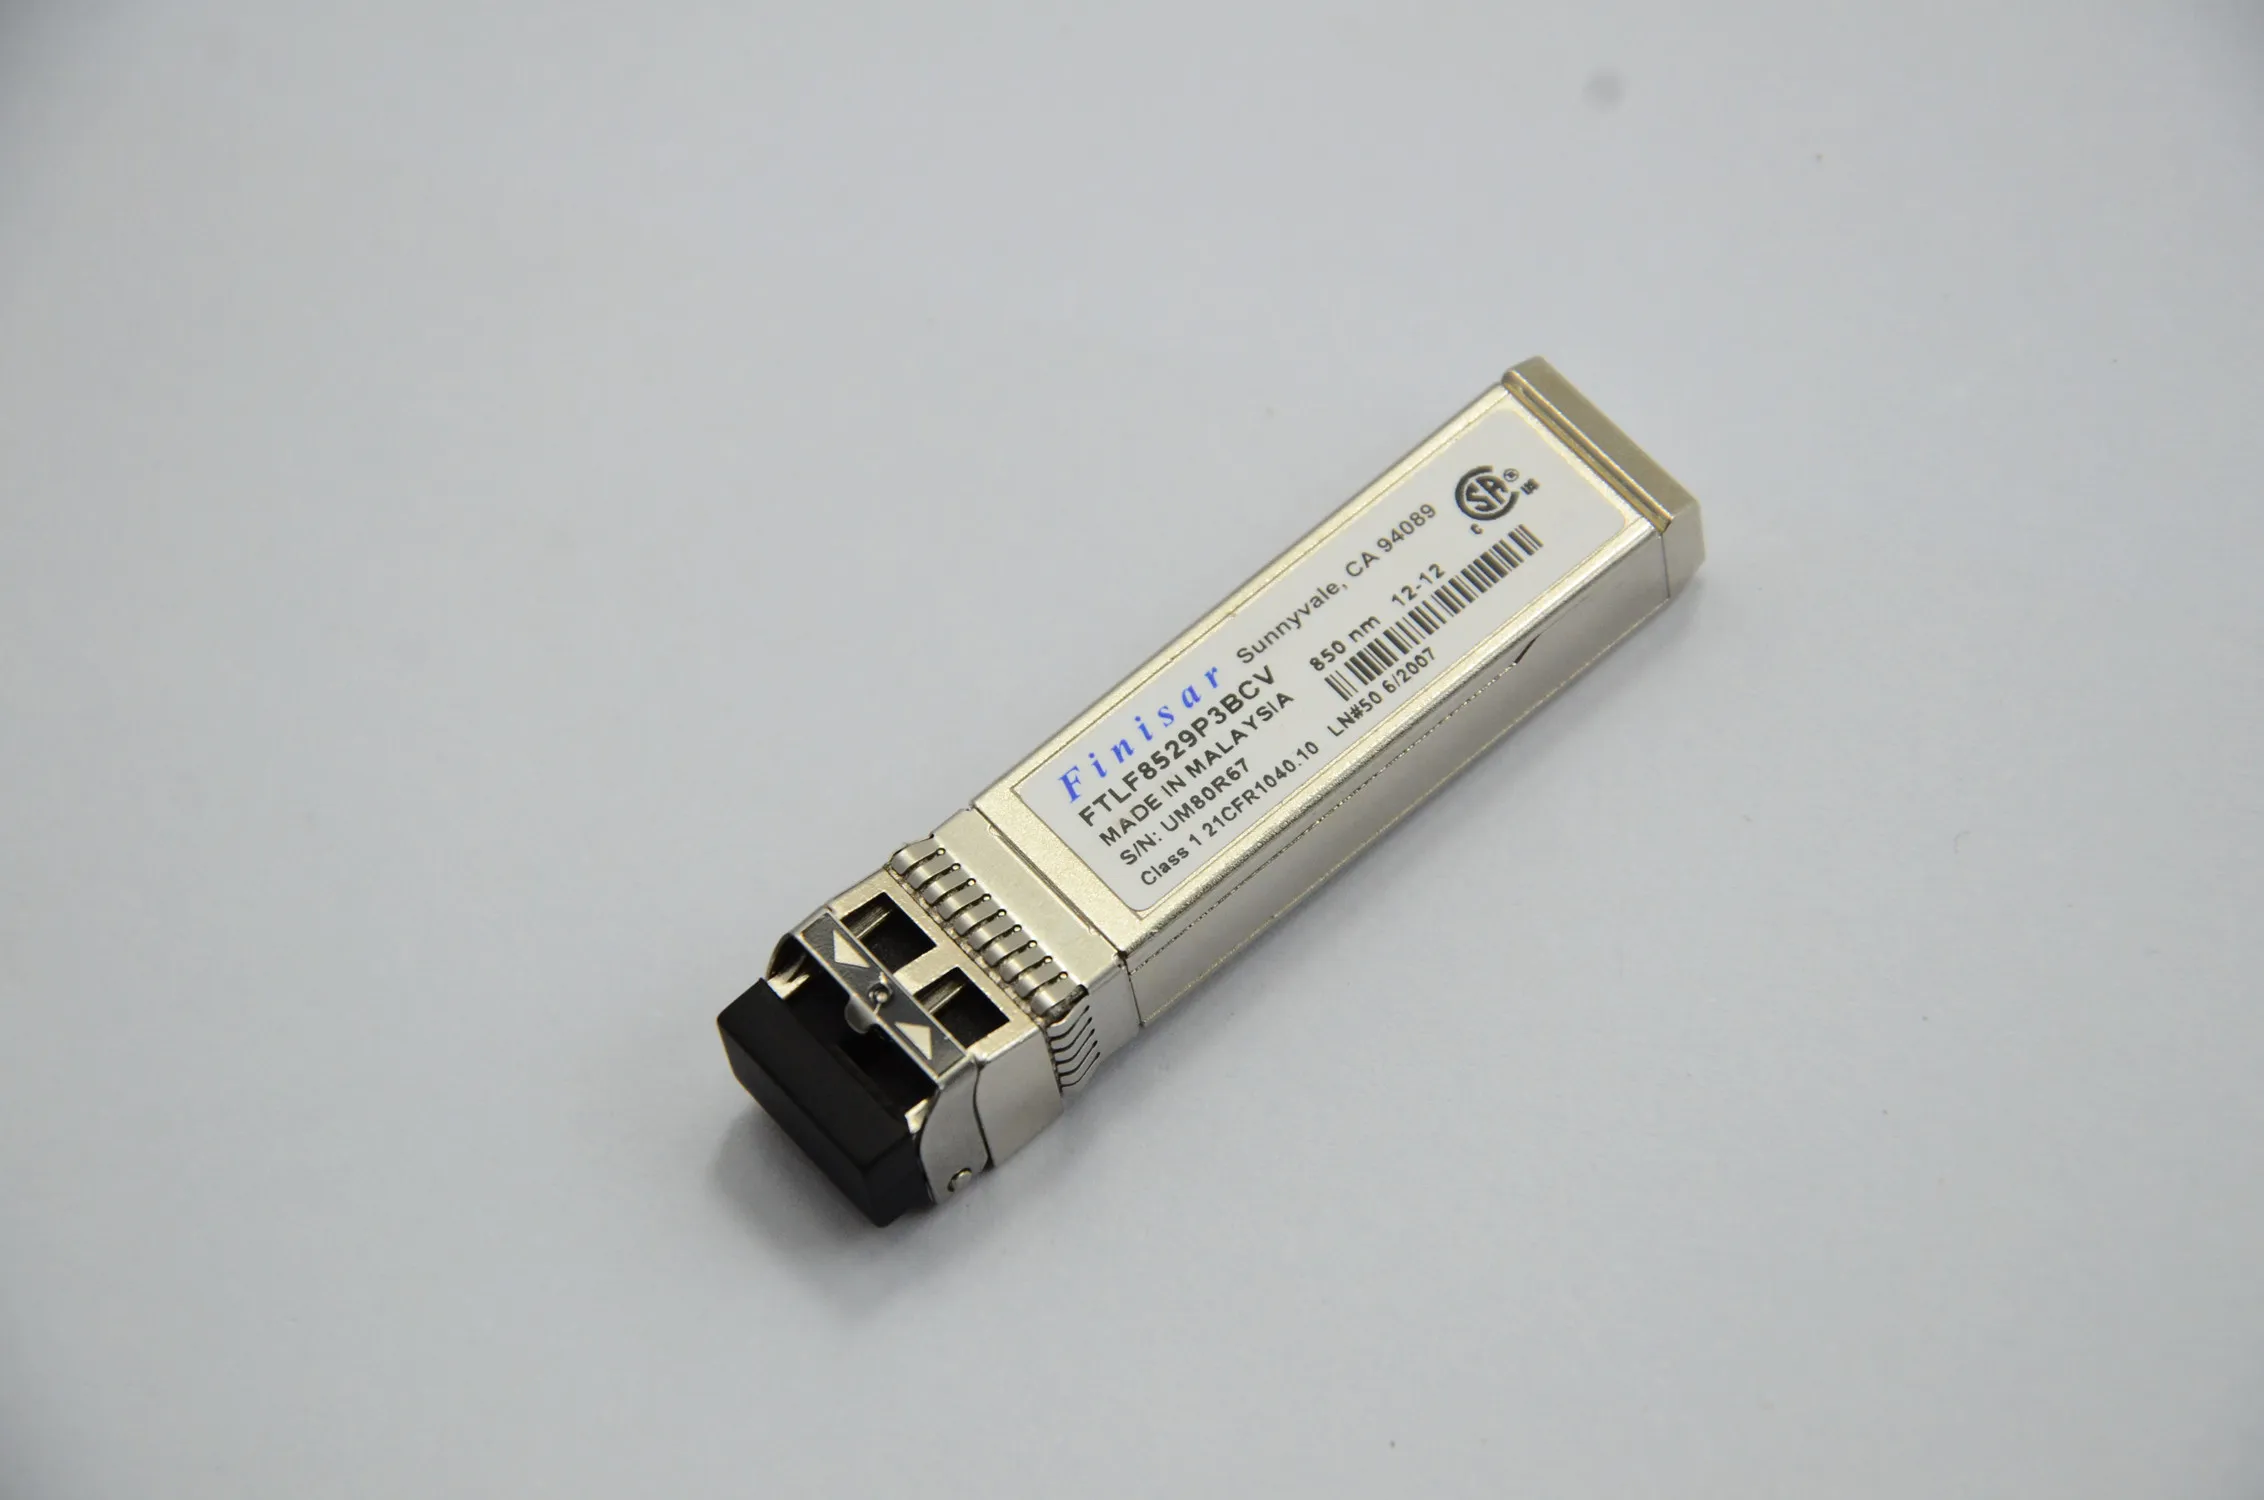 Finisar sfp 16g/FTLF8529P3BCV/16G 850nm LPE16002 Fiber Card LC SFP/16G network adapter general module/switch 16g sfp siyi siyi hd card recording three proof fpv camera adapter module adapted to mk15mk32hm30 sky terminal